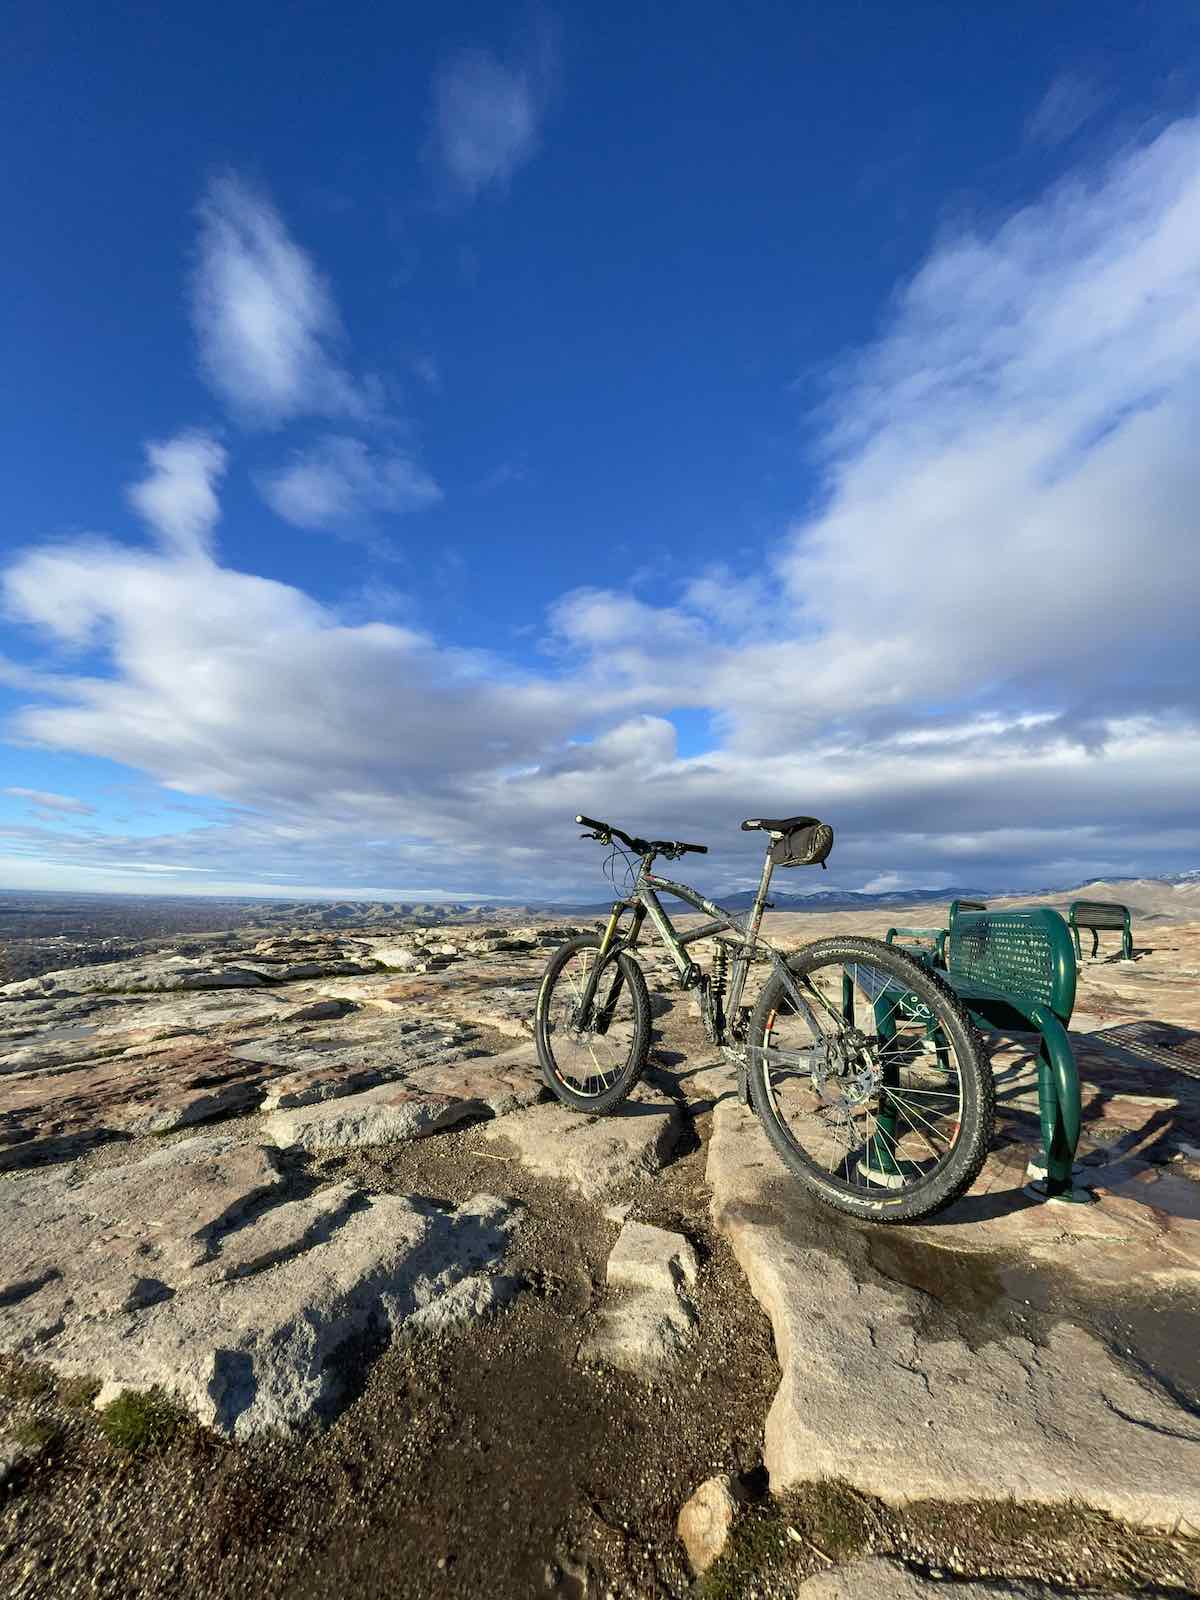 bikerumor pic of the day a mountain bike leans against a green metal bench at the top of a rocky mesa, the perspective is steep as the clouds in the sky seem to be very low and angular.